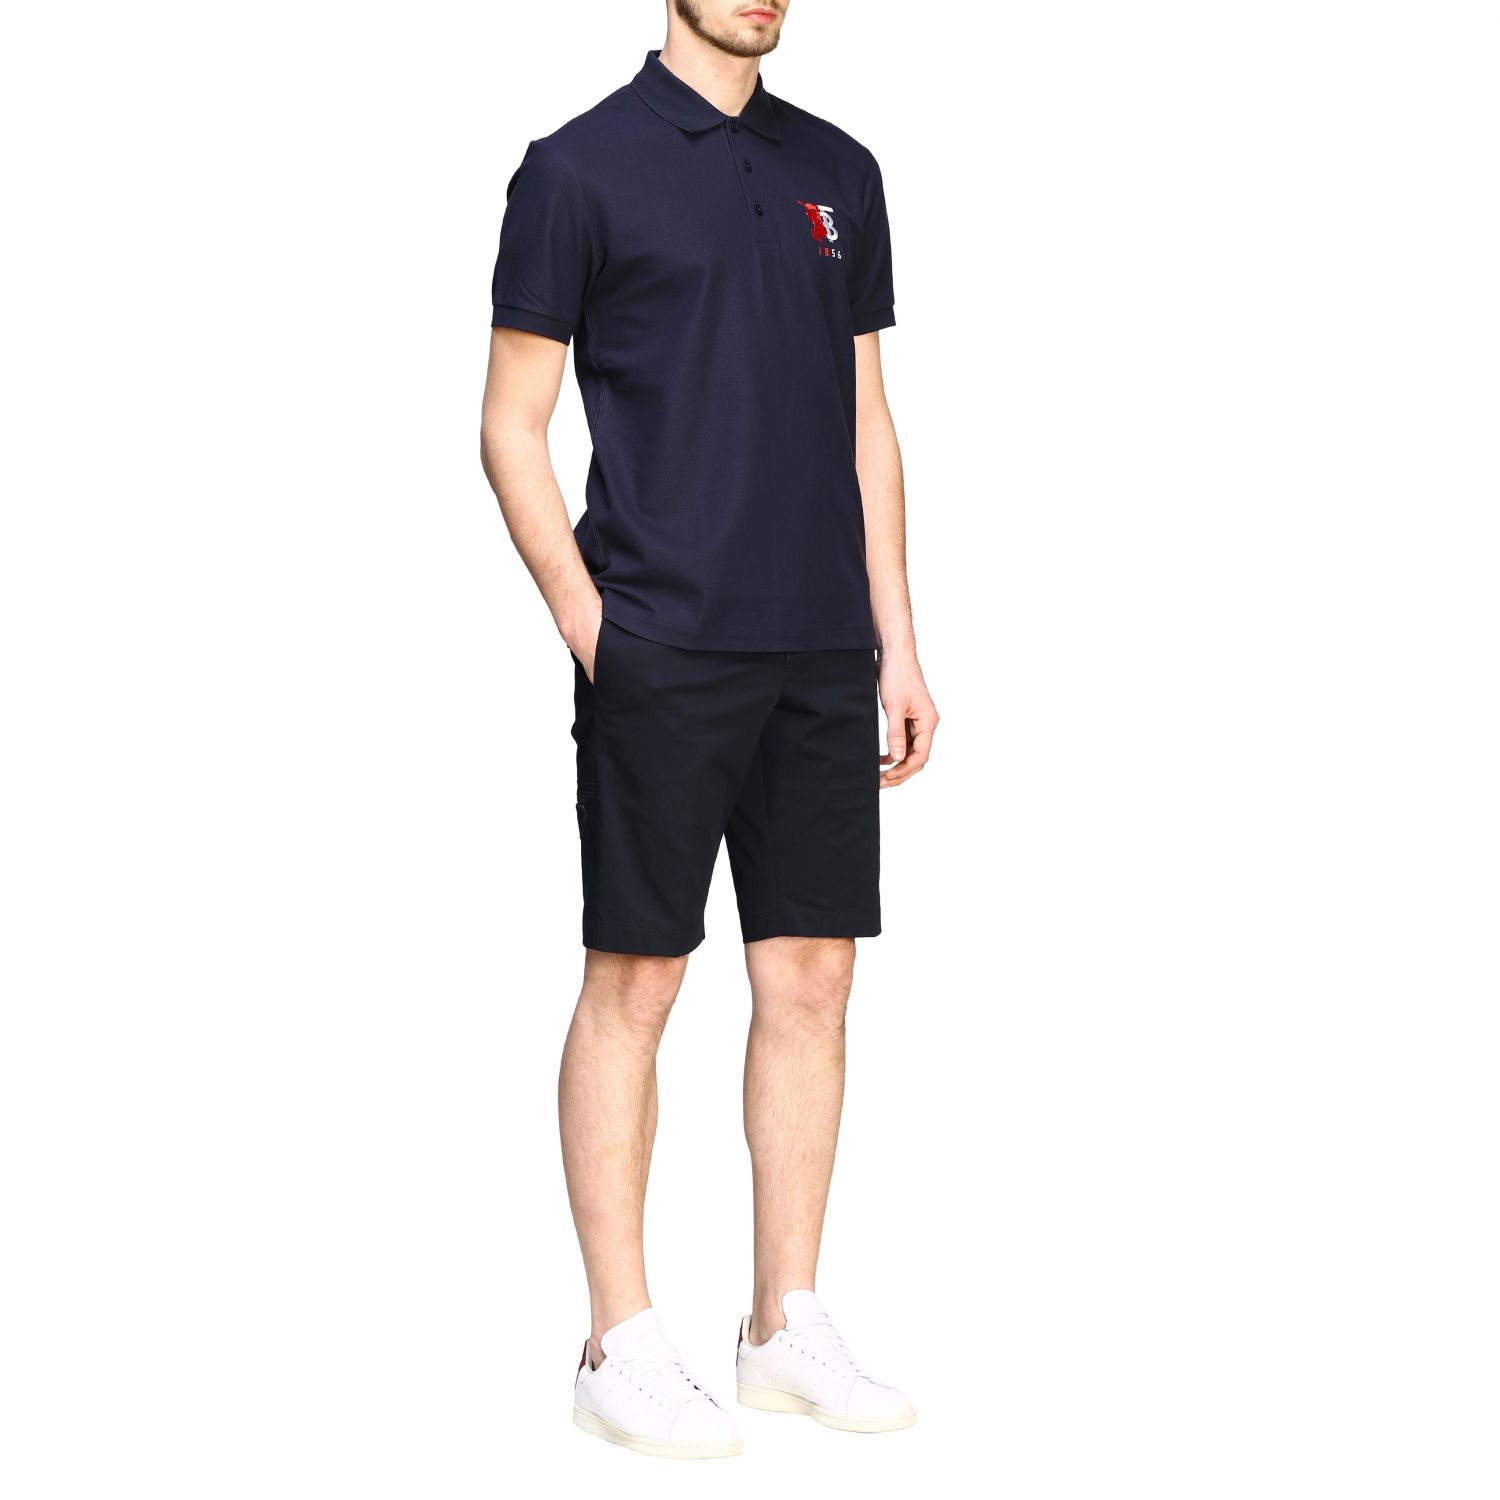 Short-sleeved Burberry polo shirt with TB logo